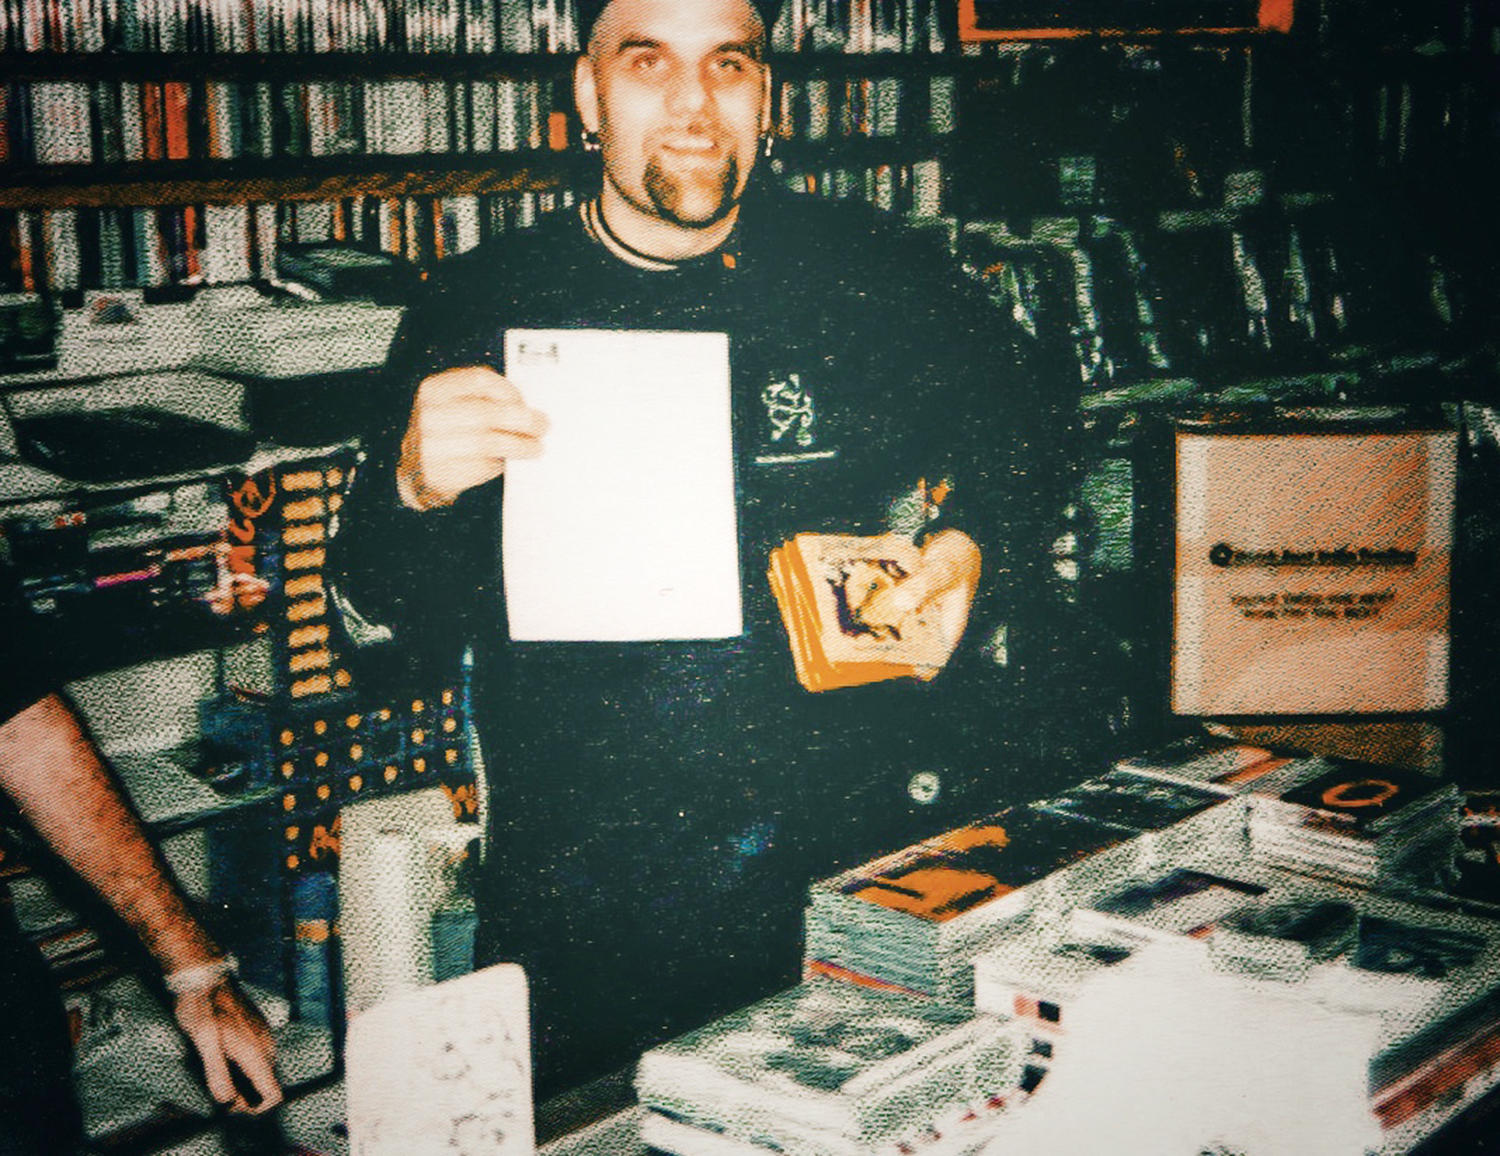 Big Frank Harrison as founder of Nemesis Records